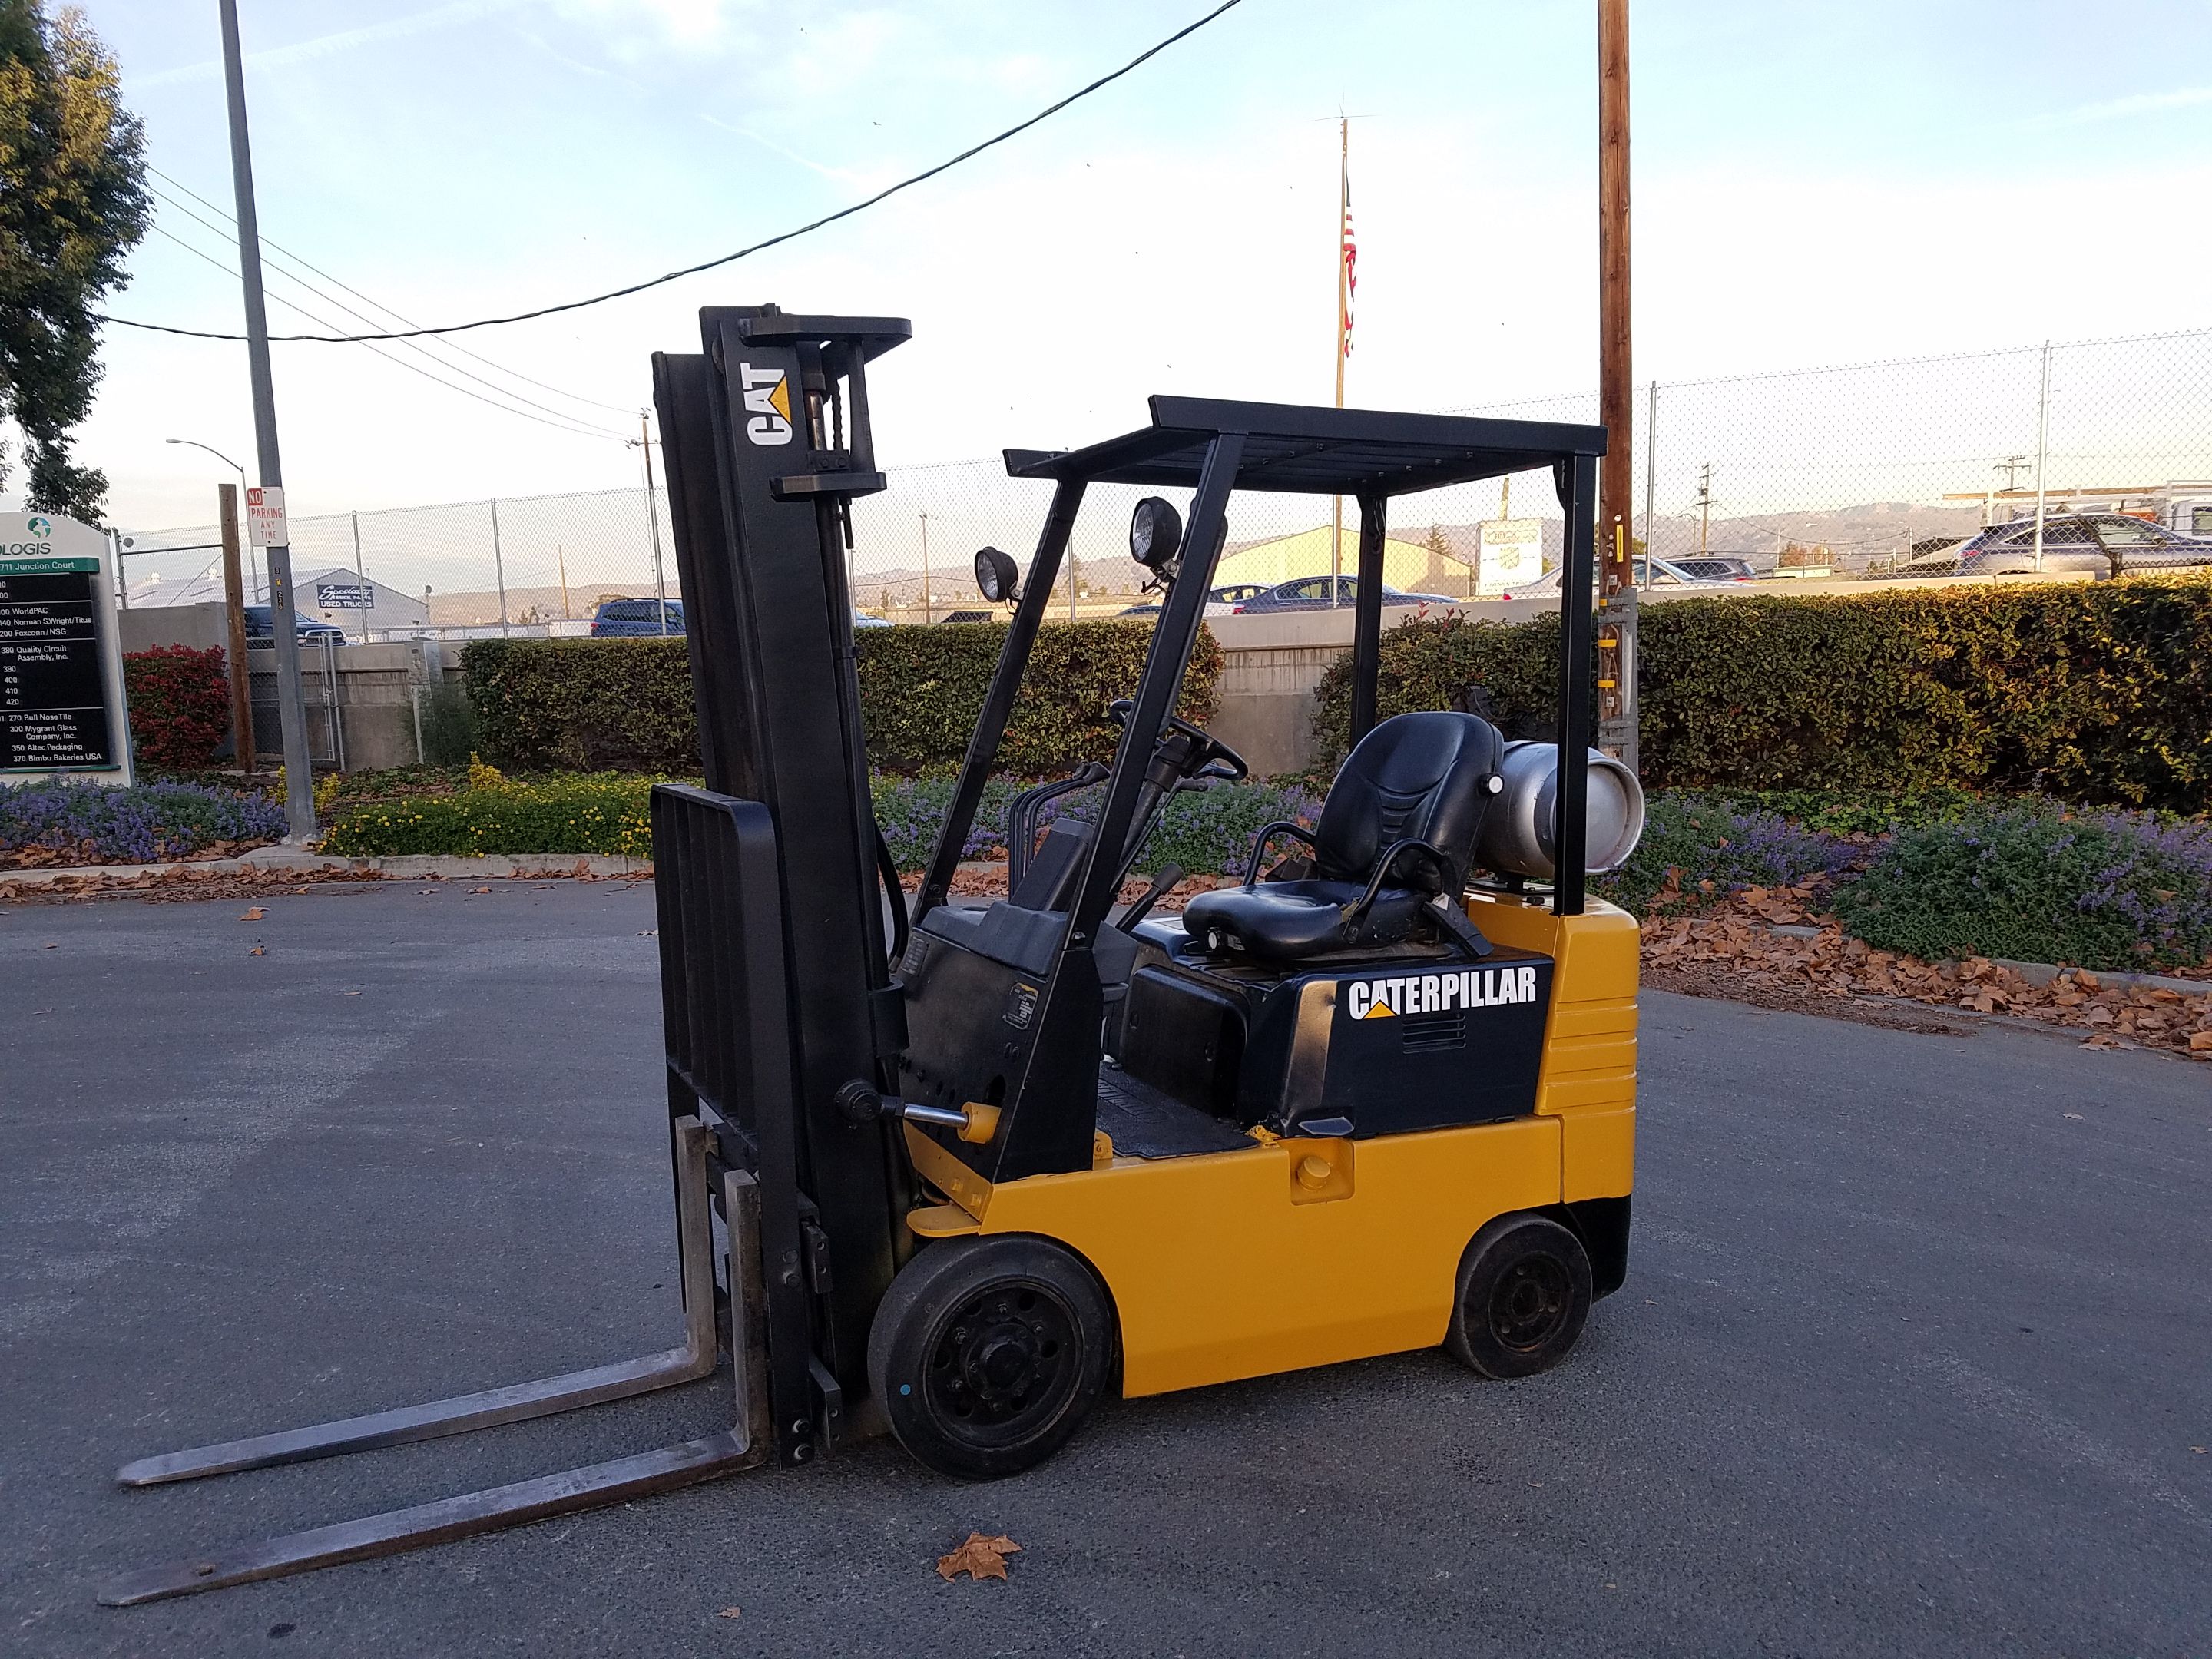 Caterpillar forklift 3000 pound capacity 2 stage side shift